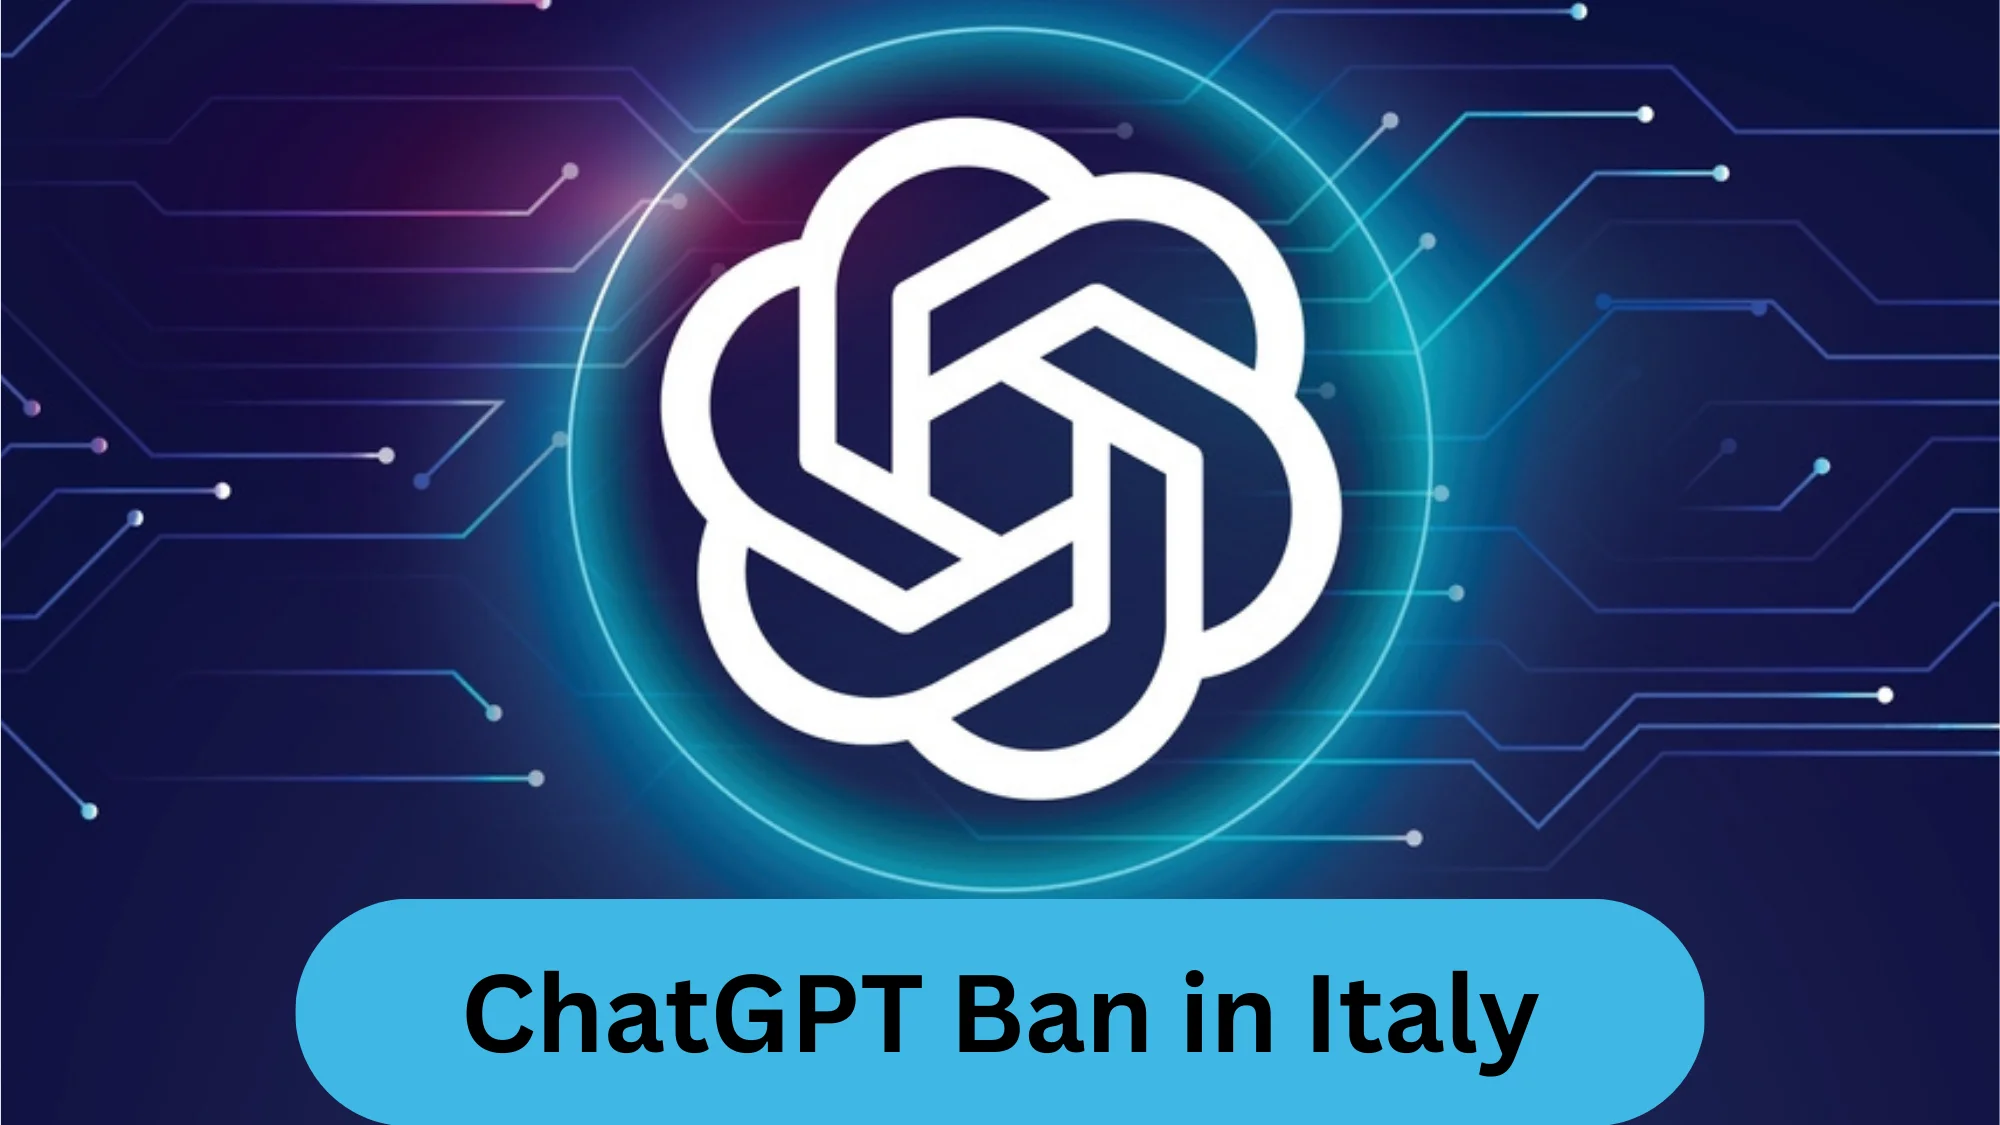 ChatGPT Ban in Italy